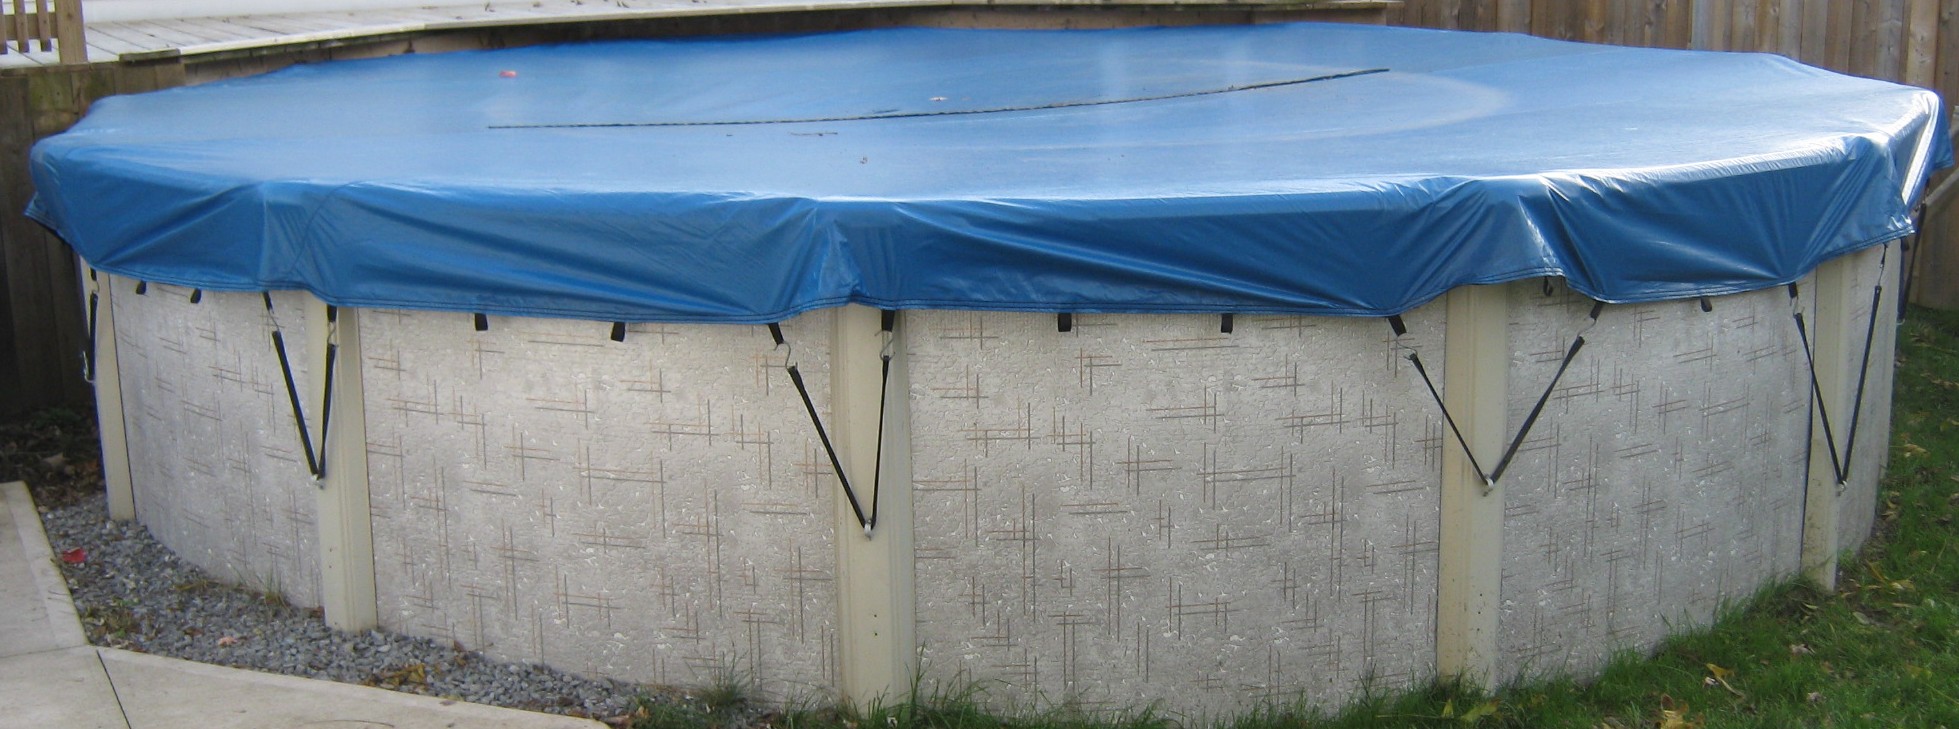 Arctic Blue Covers Above Ground, How To Put Winter Cover On Above Ground Pool With Deck